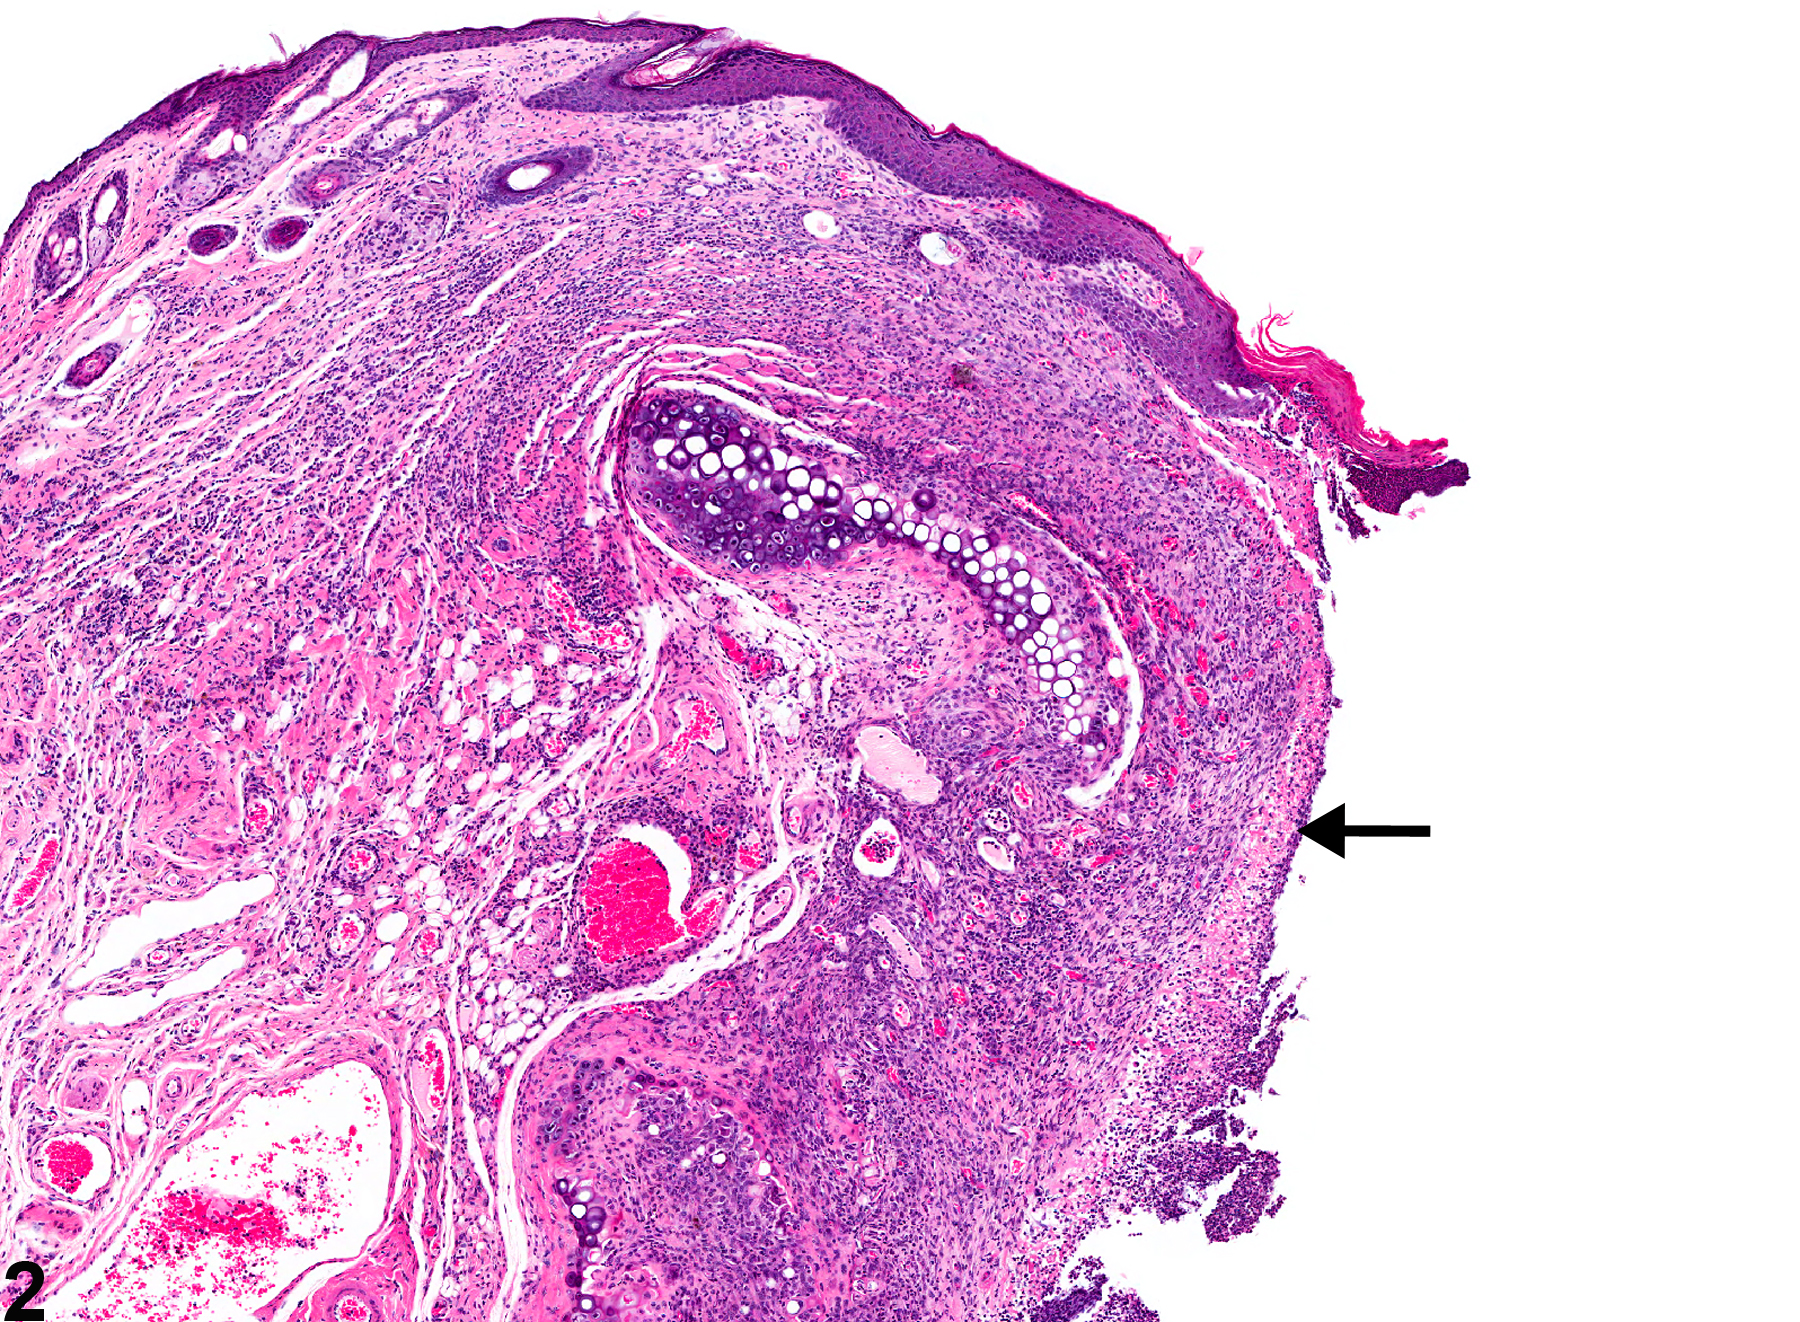 Image of ulcer, erosion in the ear from a male Swiss CD-1 mouse in a chronic study